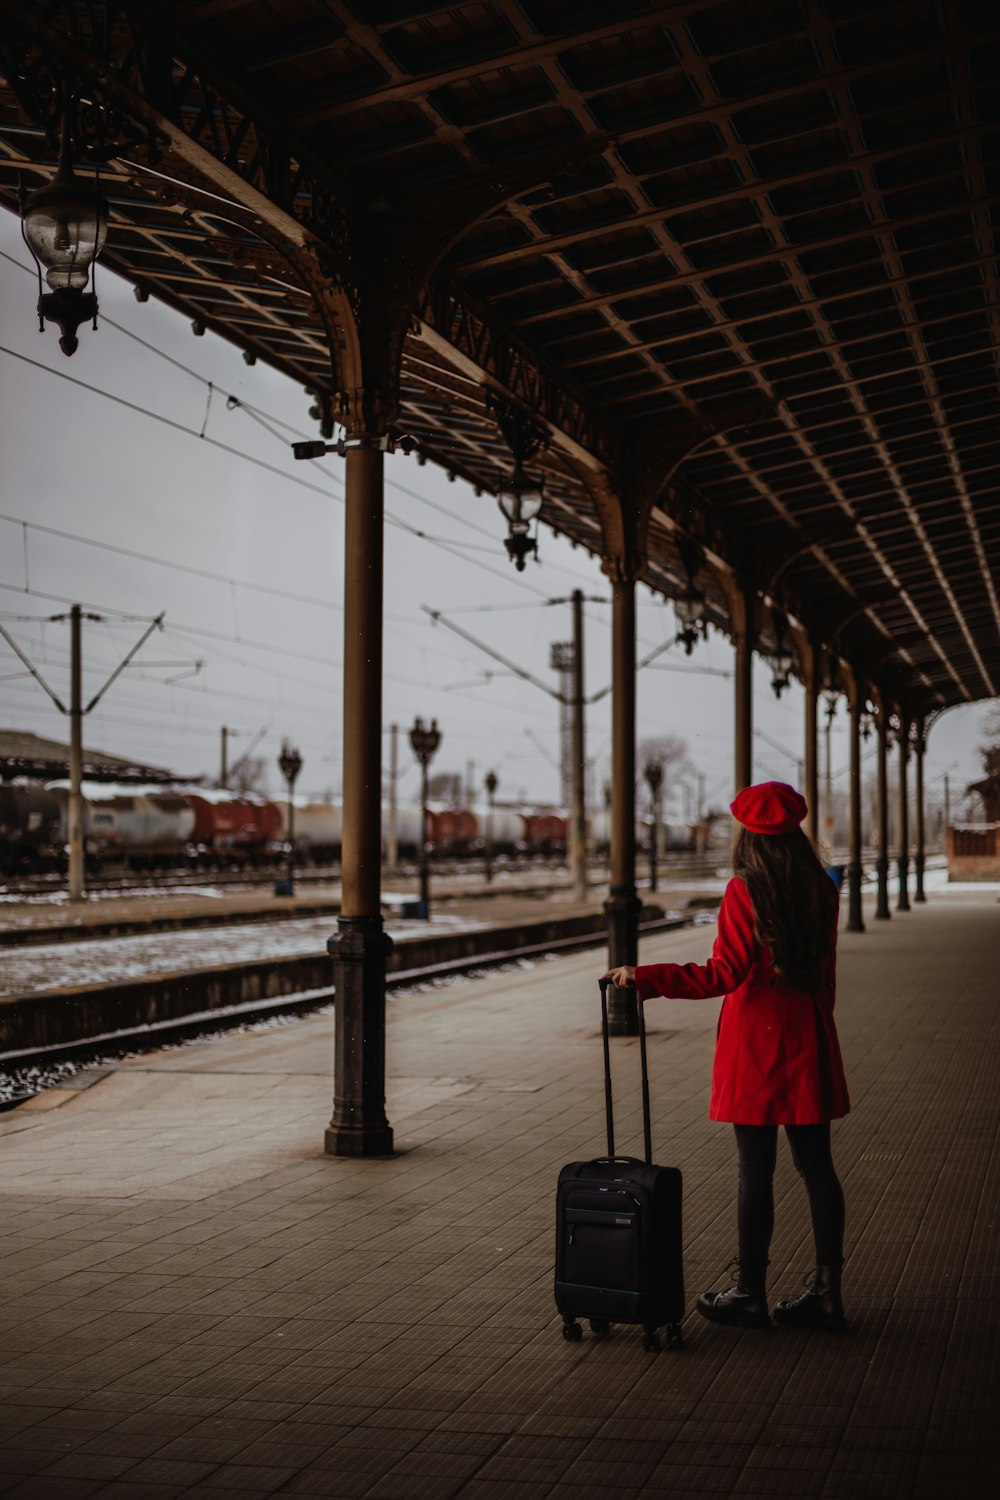 a woman with a suitcase waiting for a train